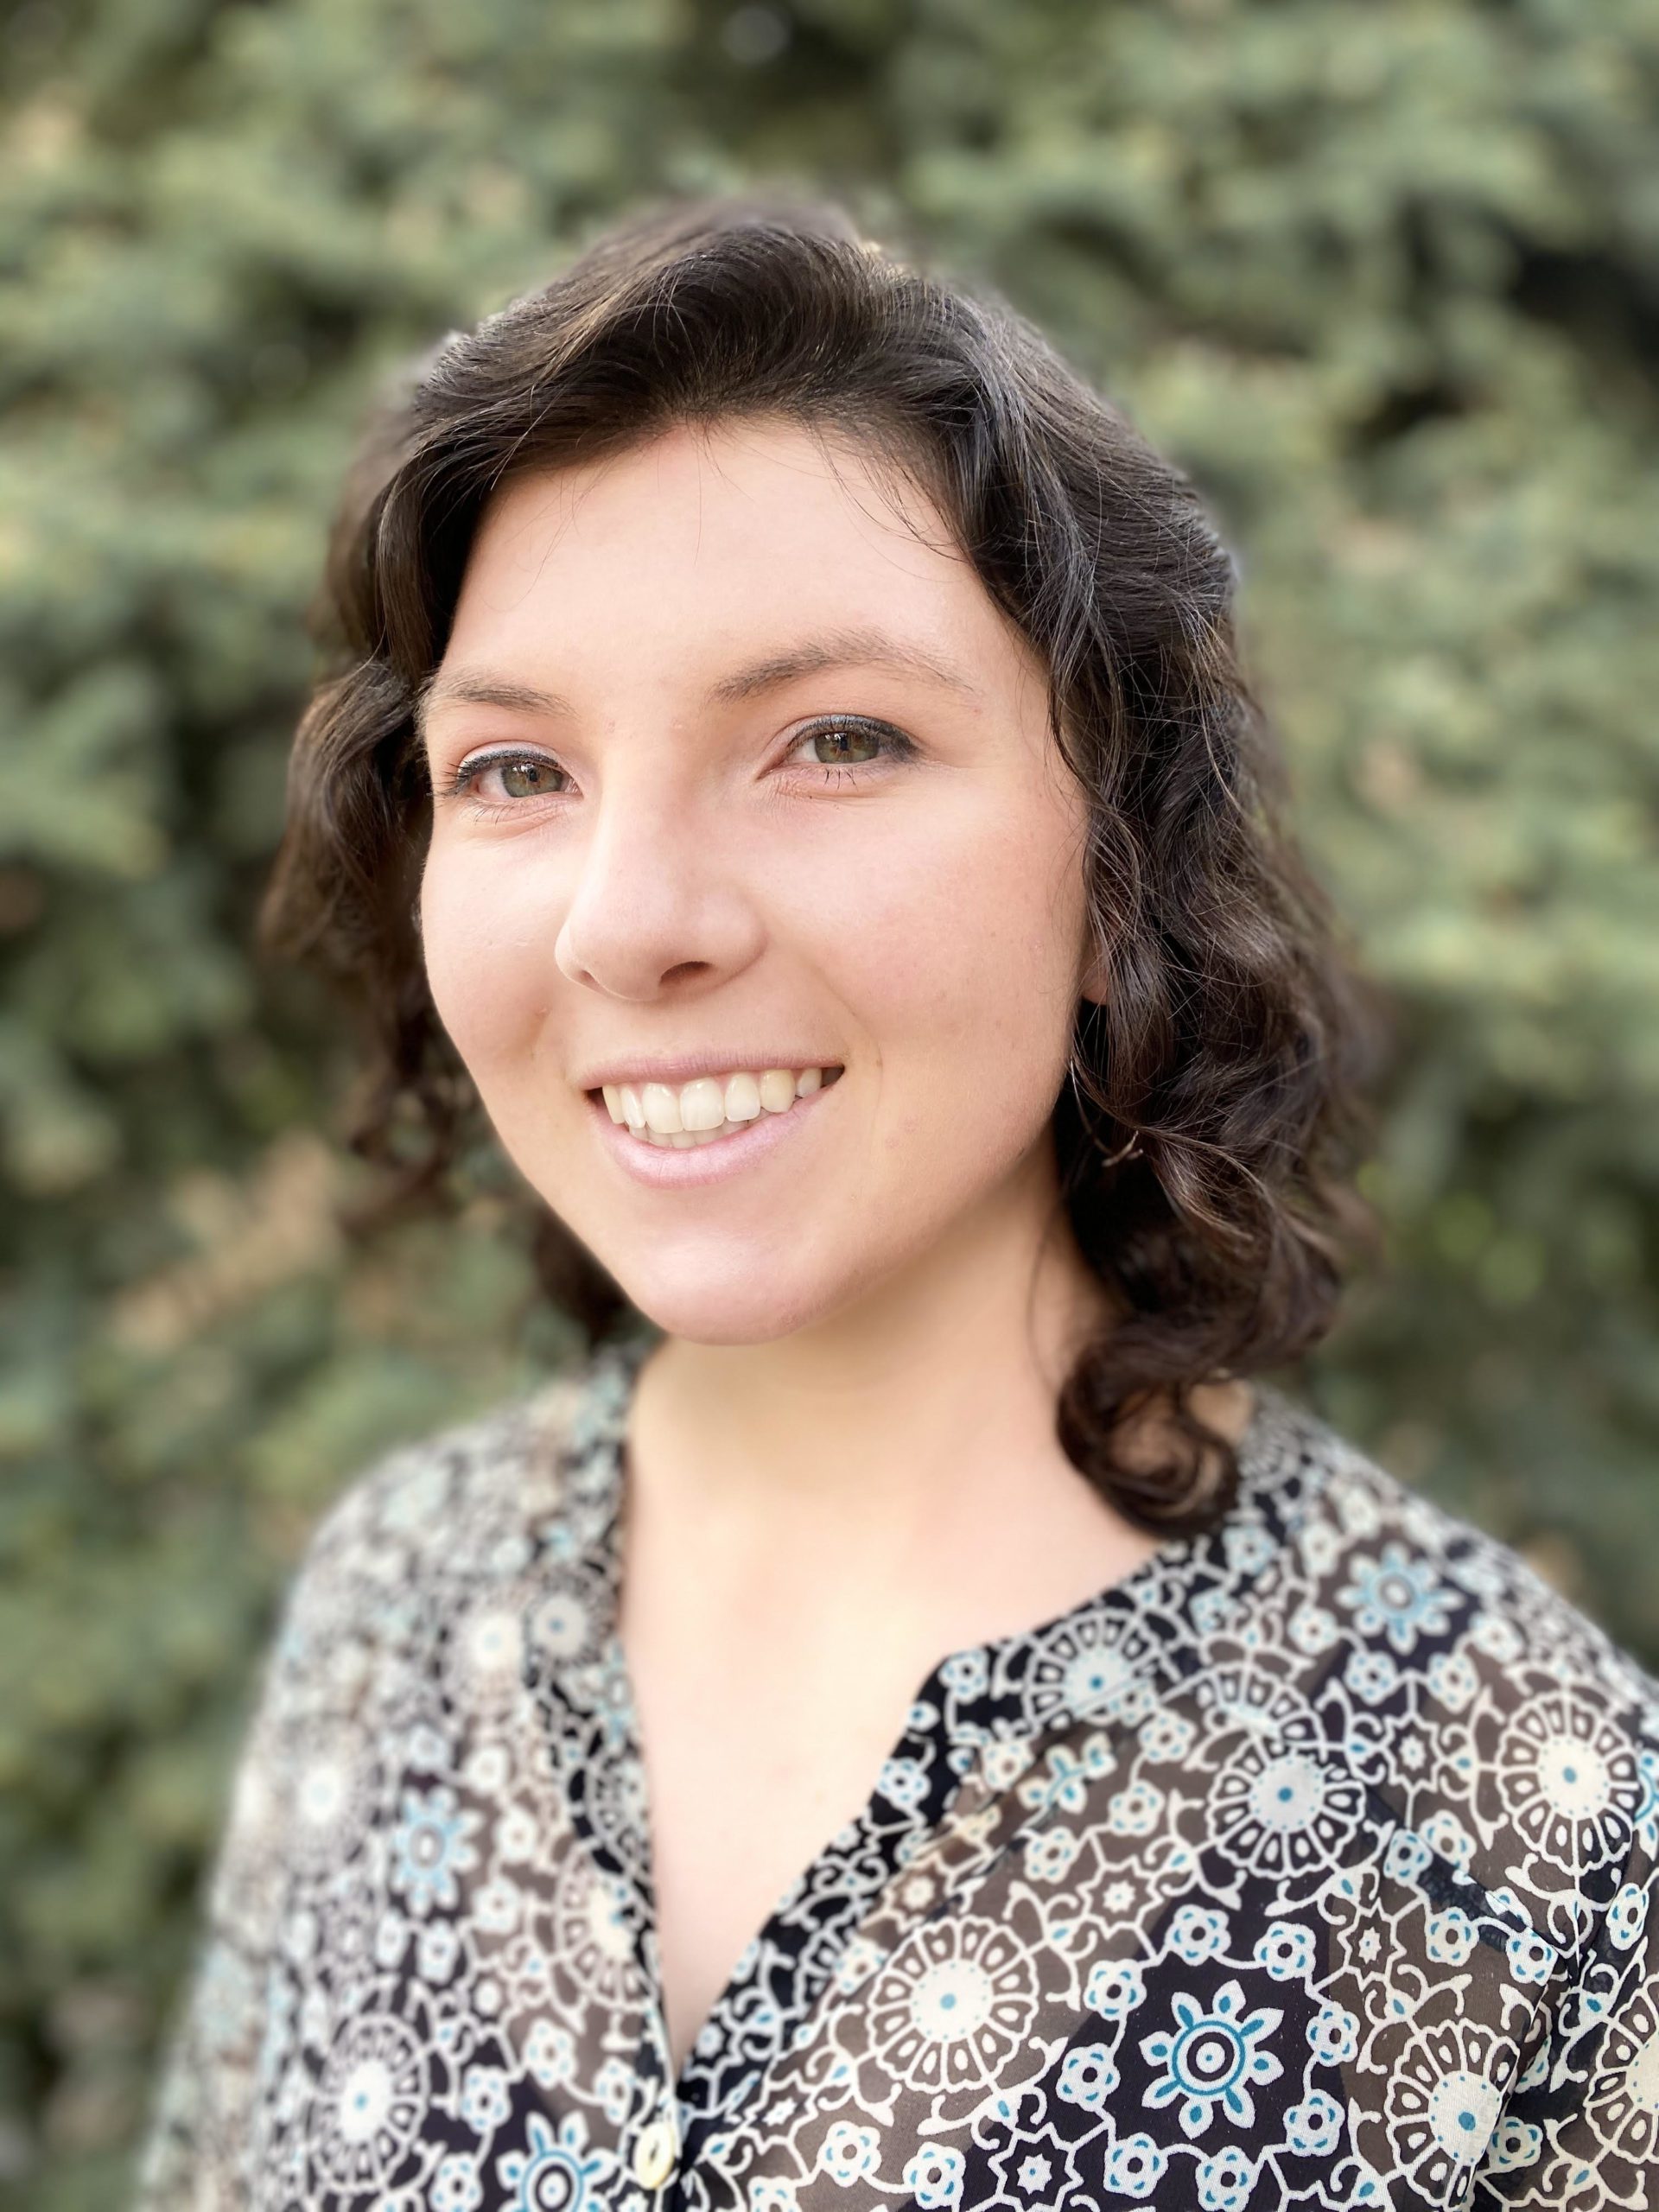 One Meal at a Time, 2020 PIIE Scholarship Recipient Ally Faller, is Changing Boulder